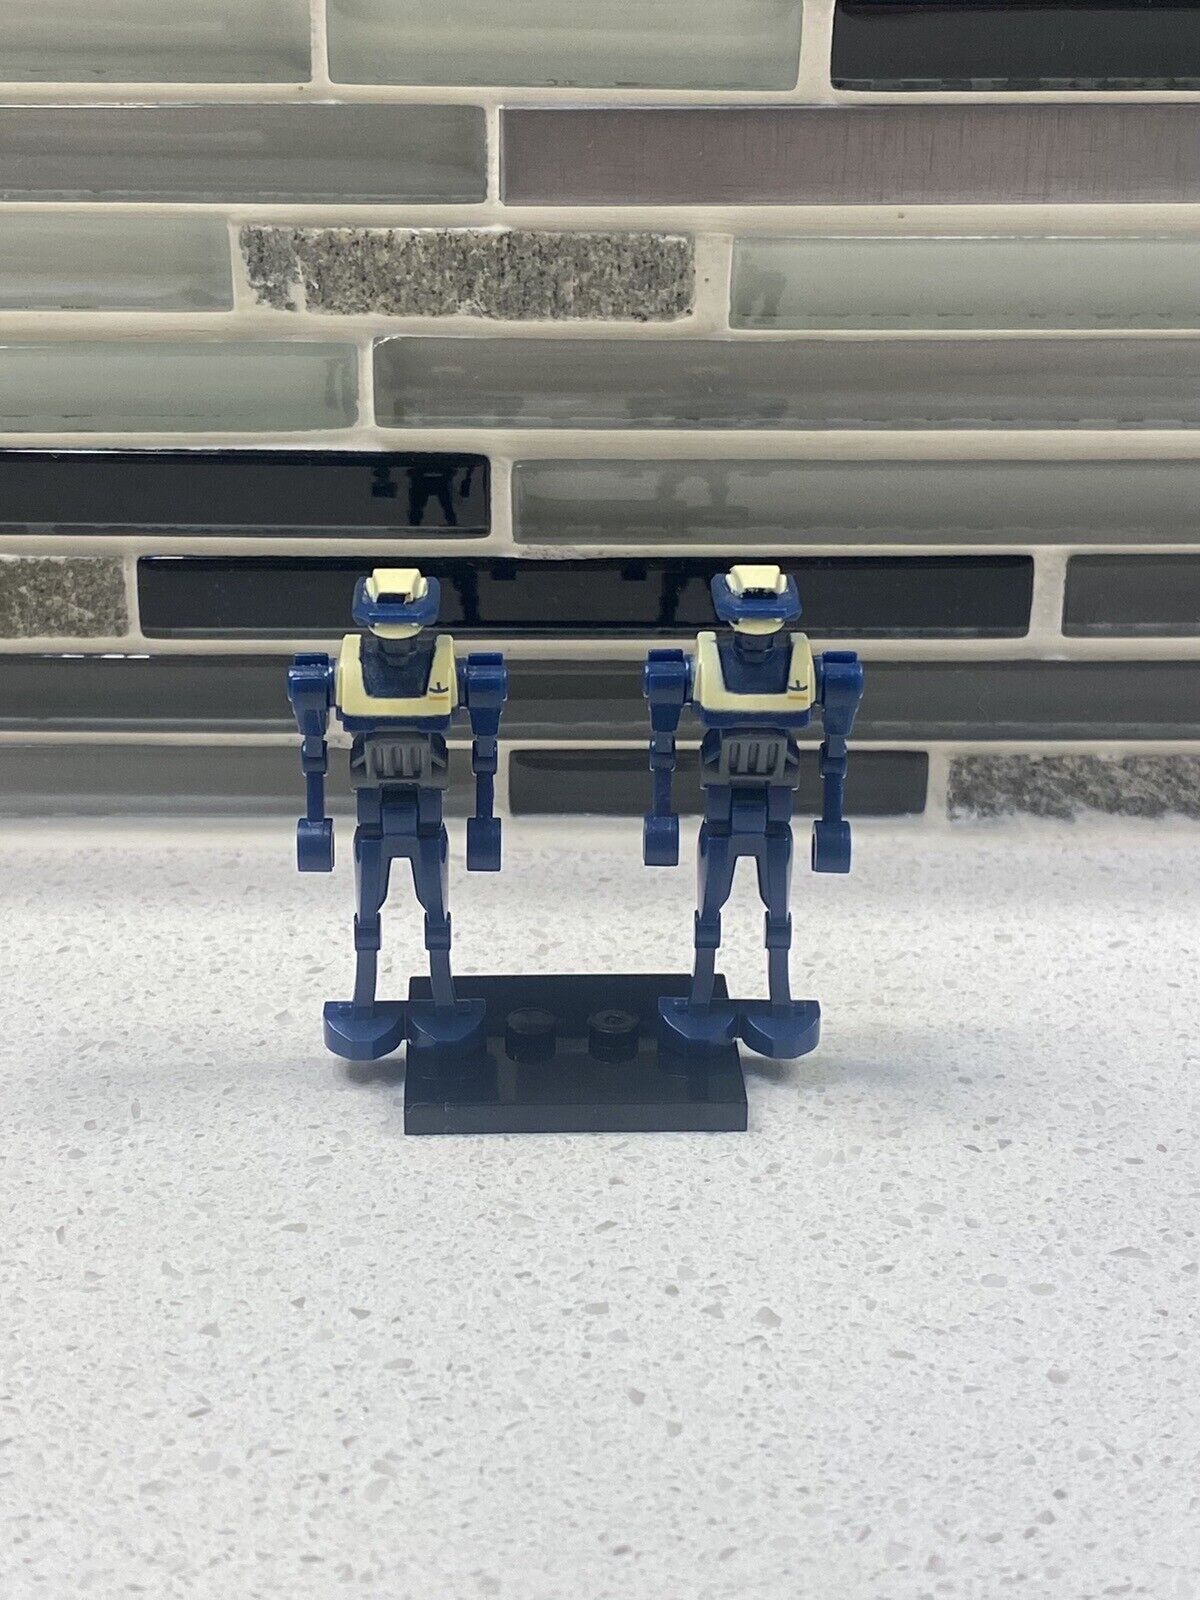 Star Wars 2 TX-20 Tactical Droid Minifigures (FOR LEGO)